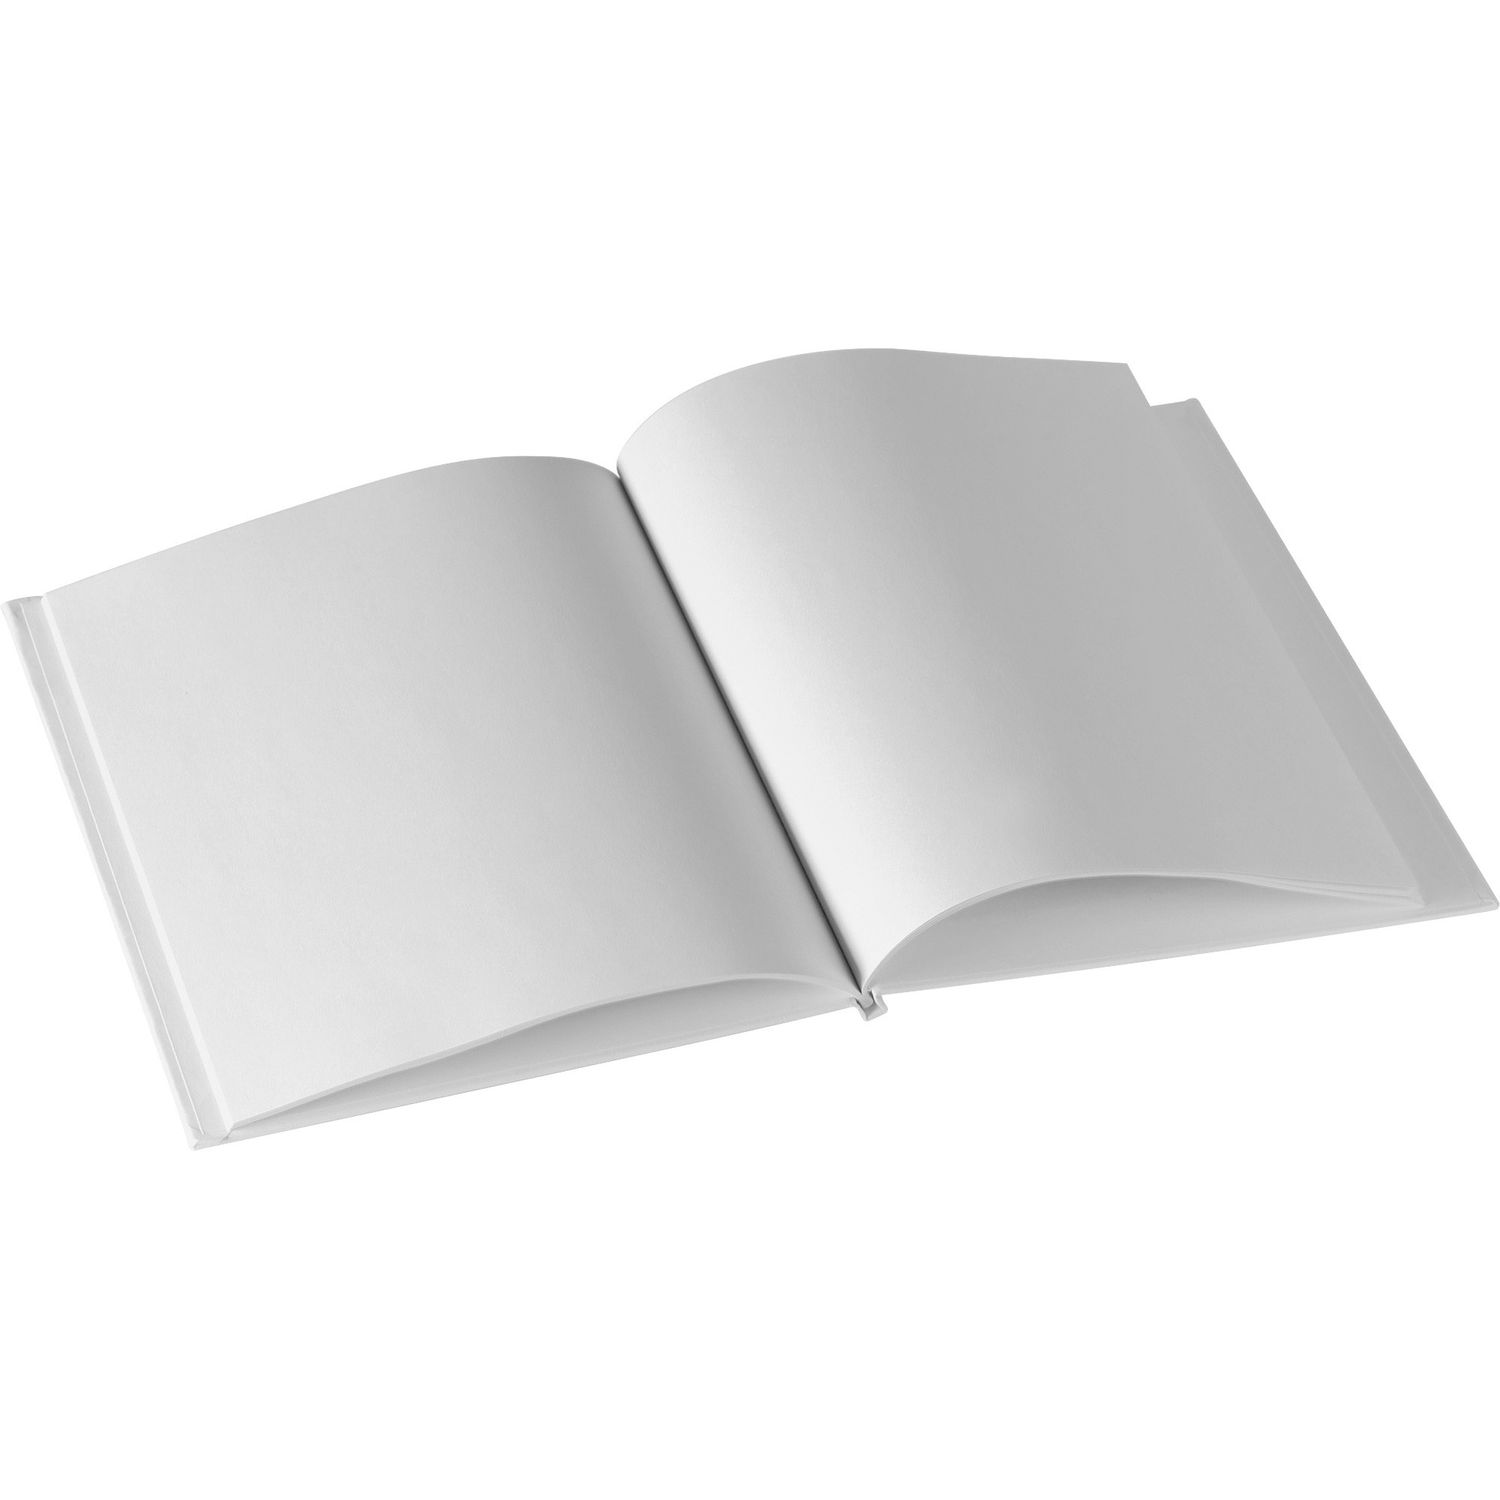 Hardcover Blank Book By Ashley Productions, Inc Ash10700 |  Ontimesupplies.Com